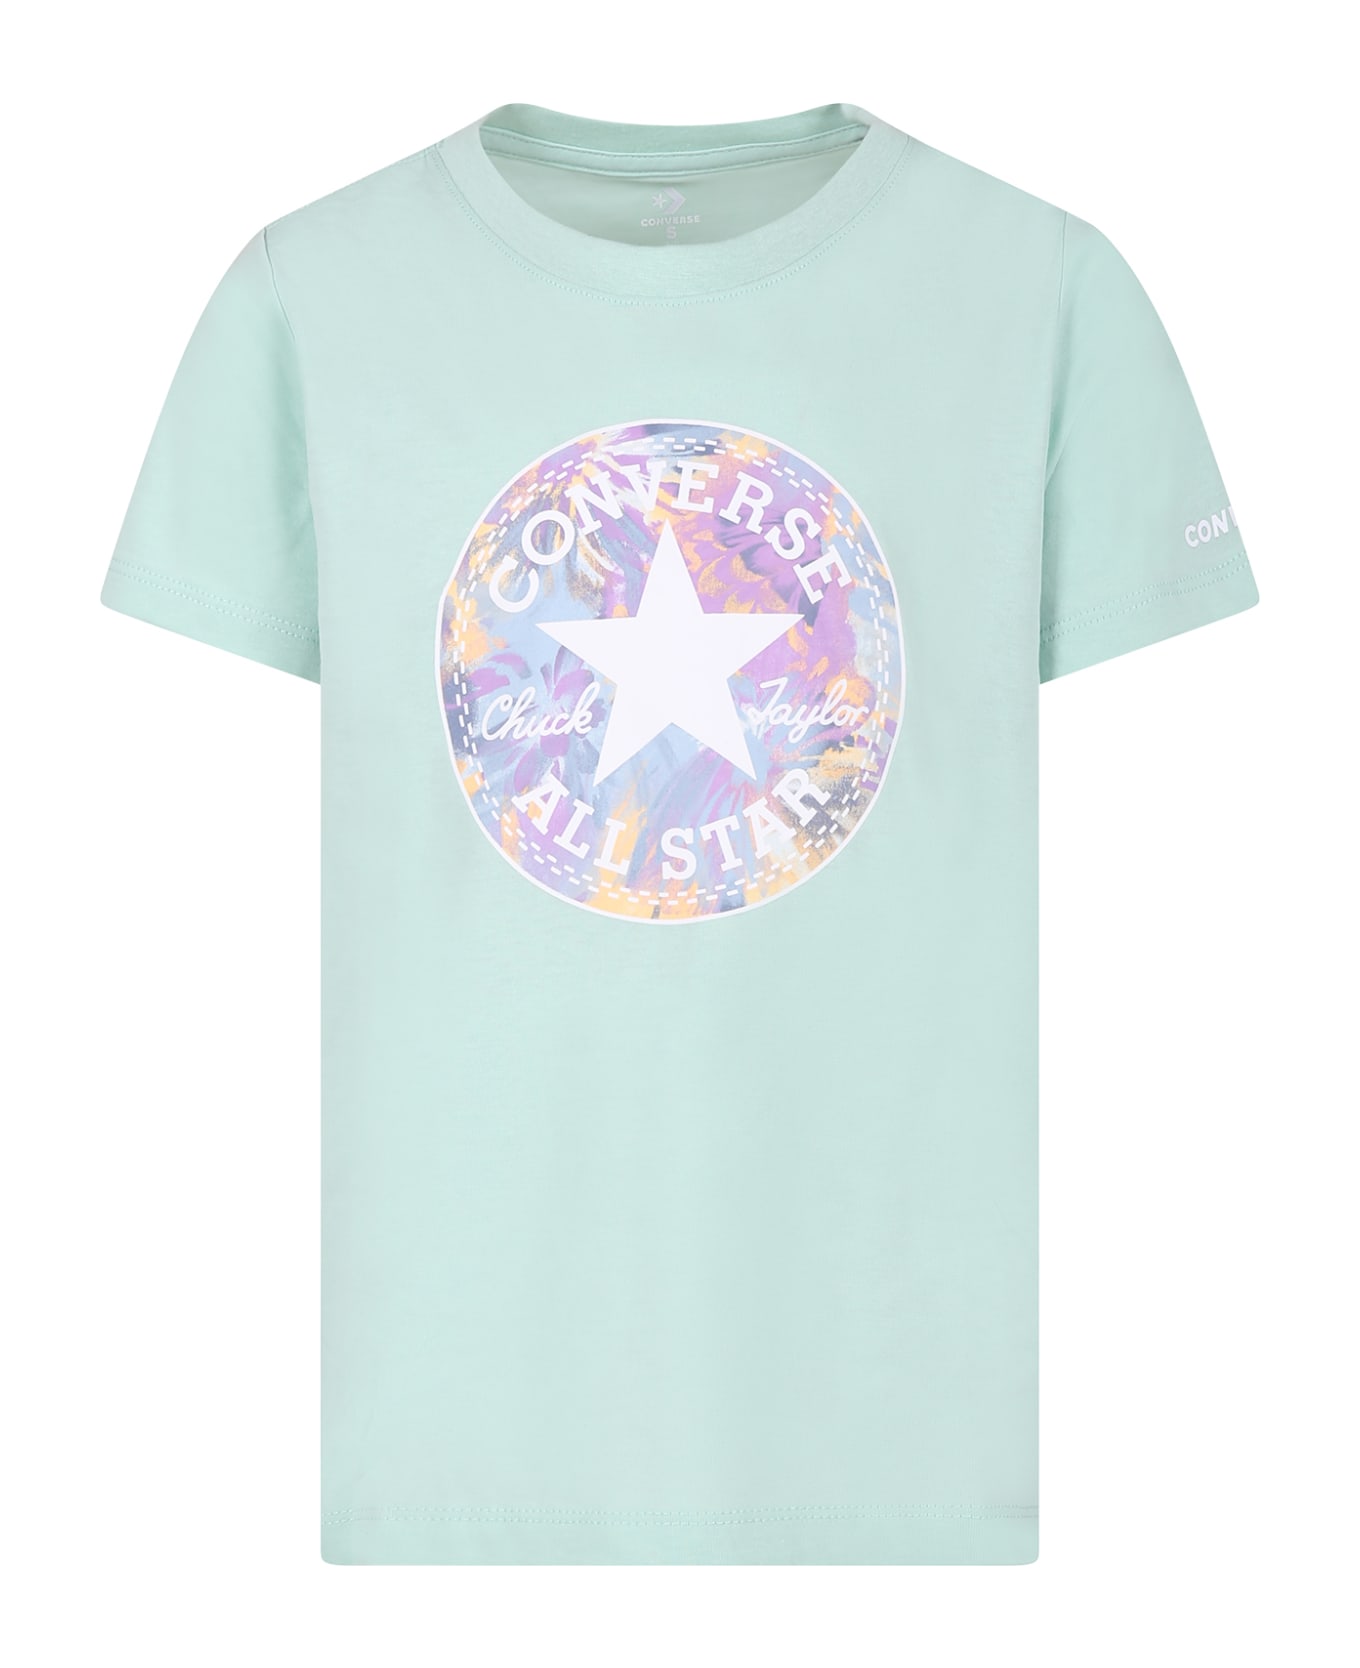 Converse Green T-shirt For Girl With Logo Print - Green